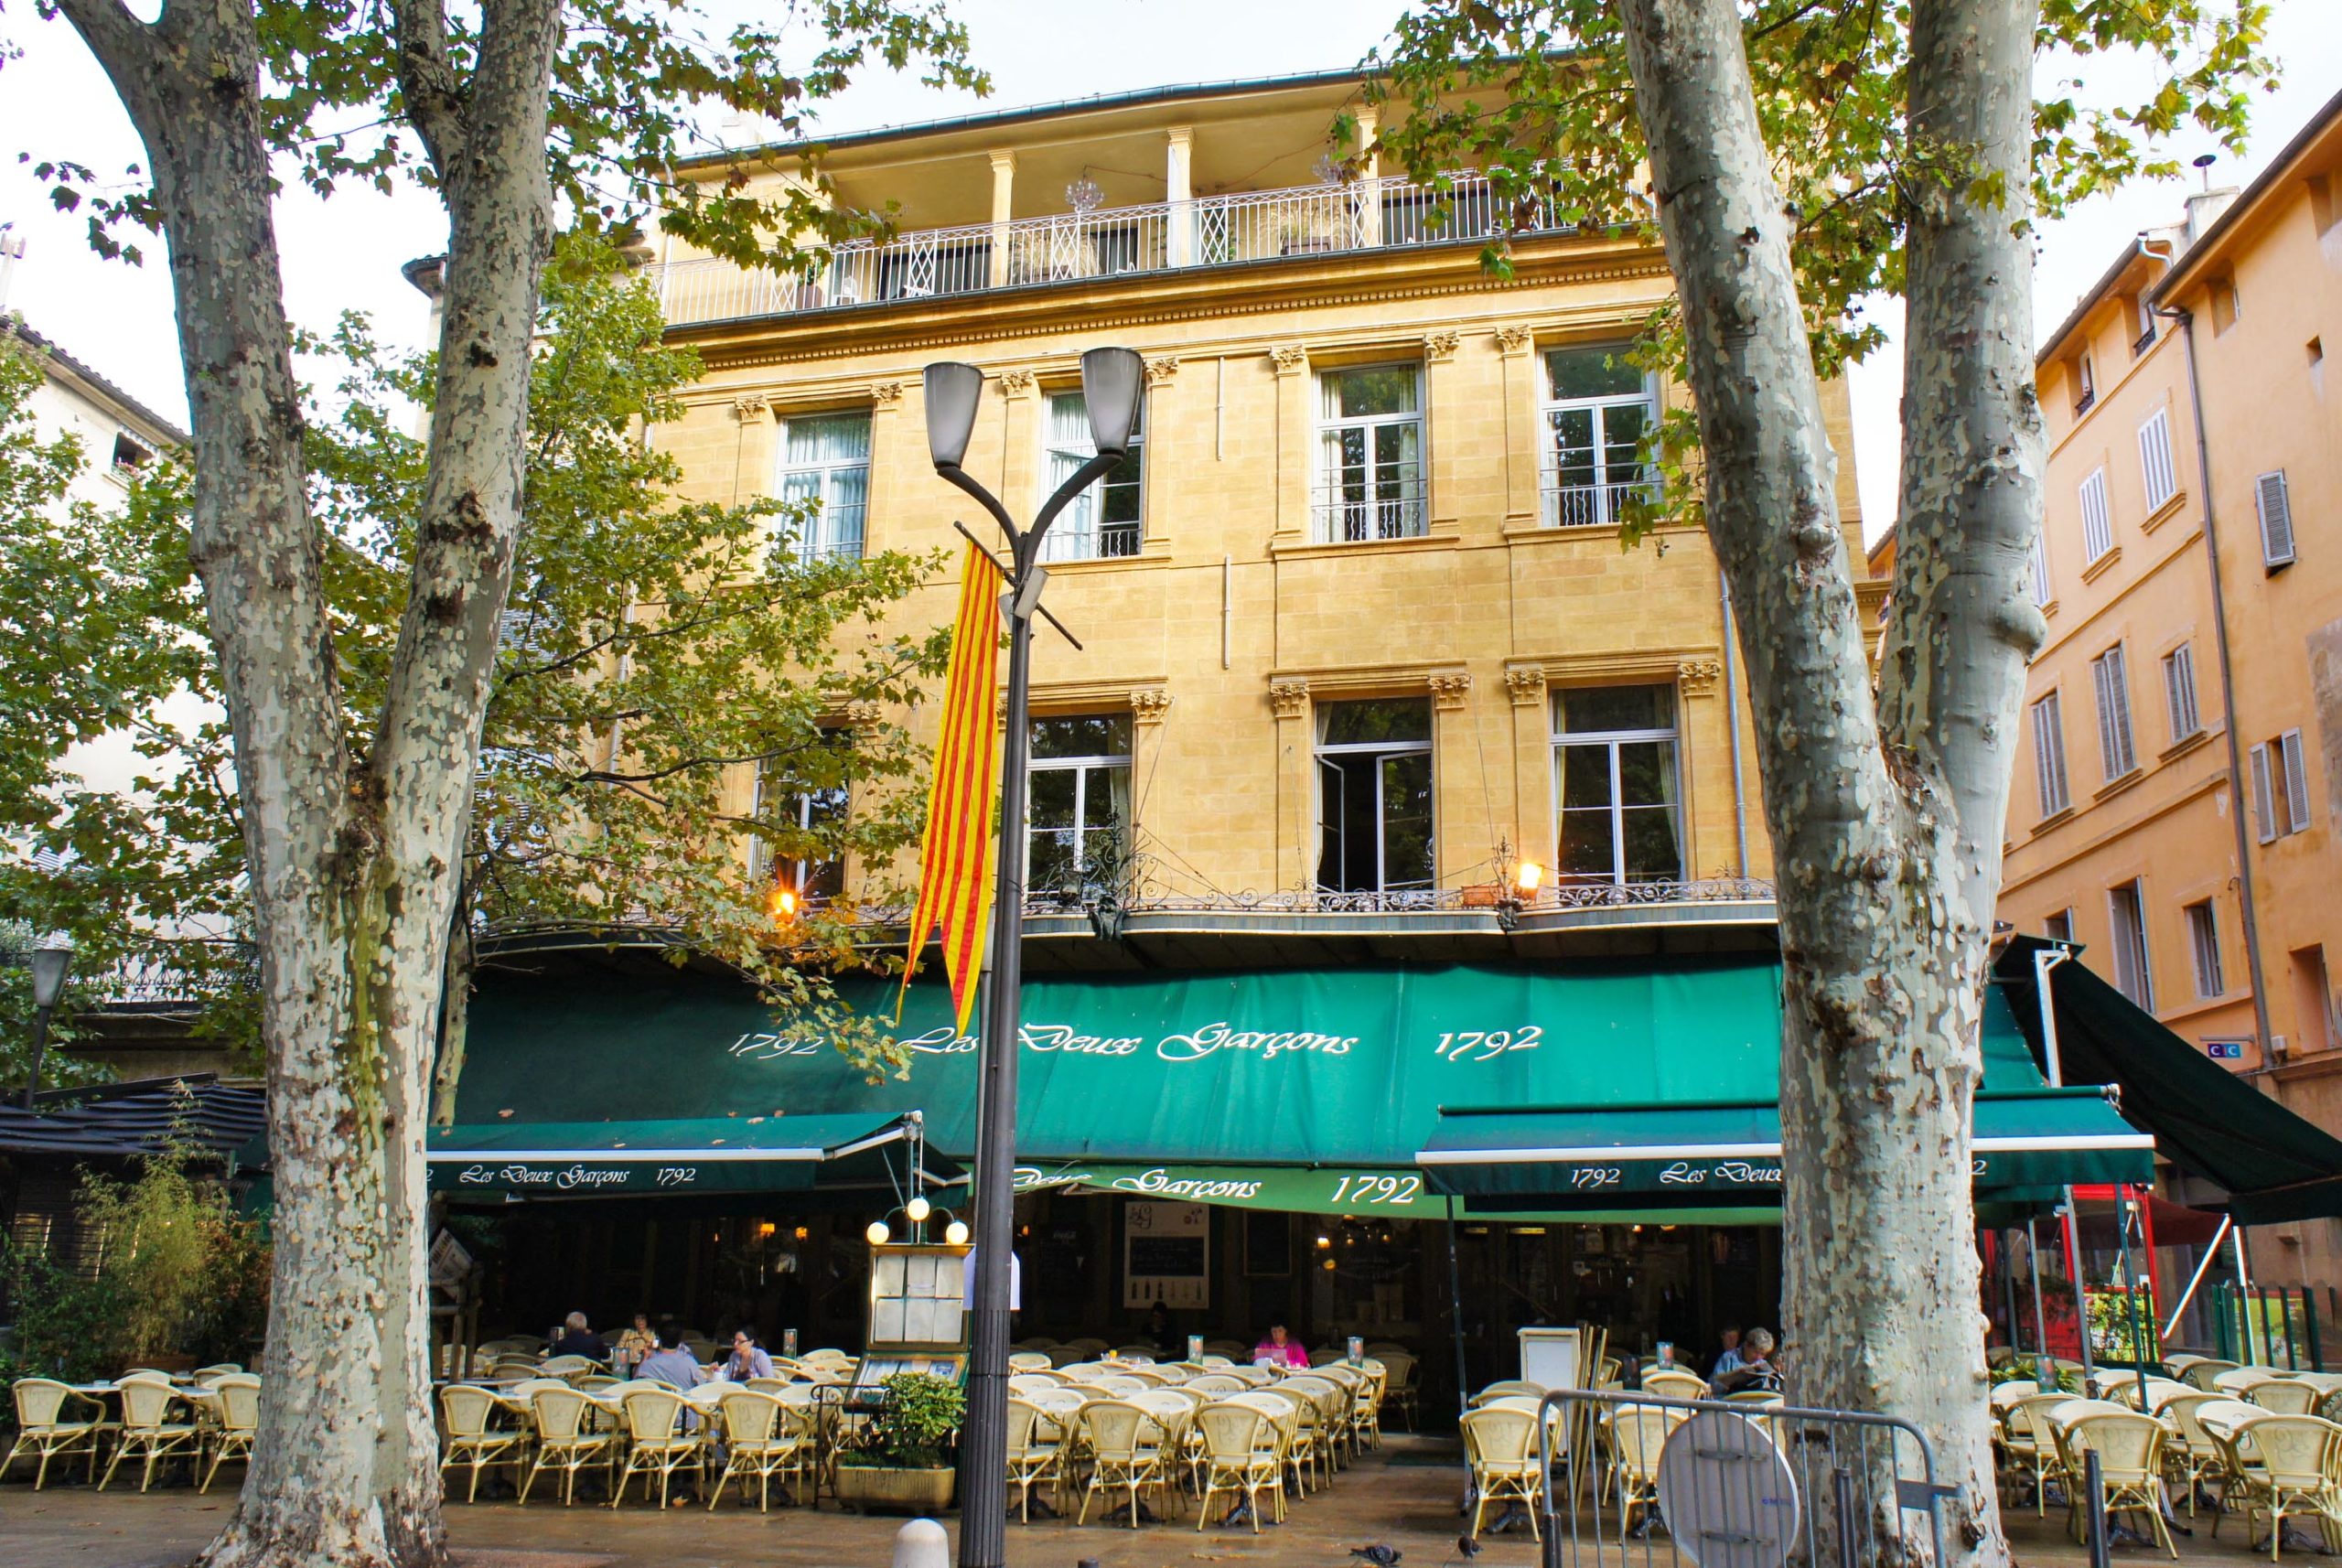 Cafe des Deux Garcons © JM Campaner - licence [CC BY-SA 3.0] from Wikimedia Commons